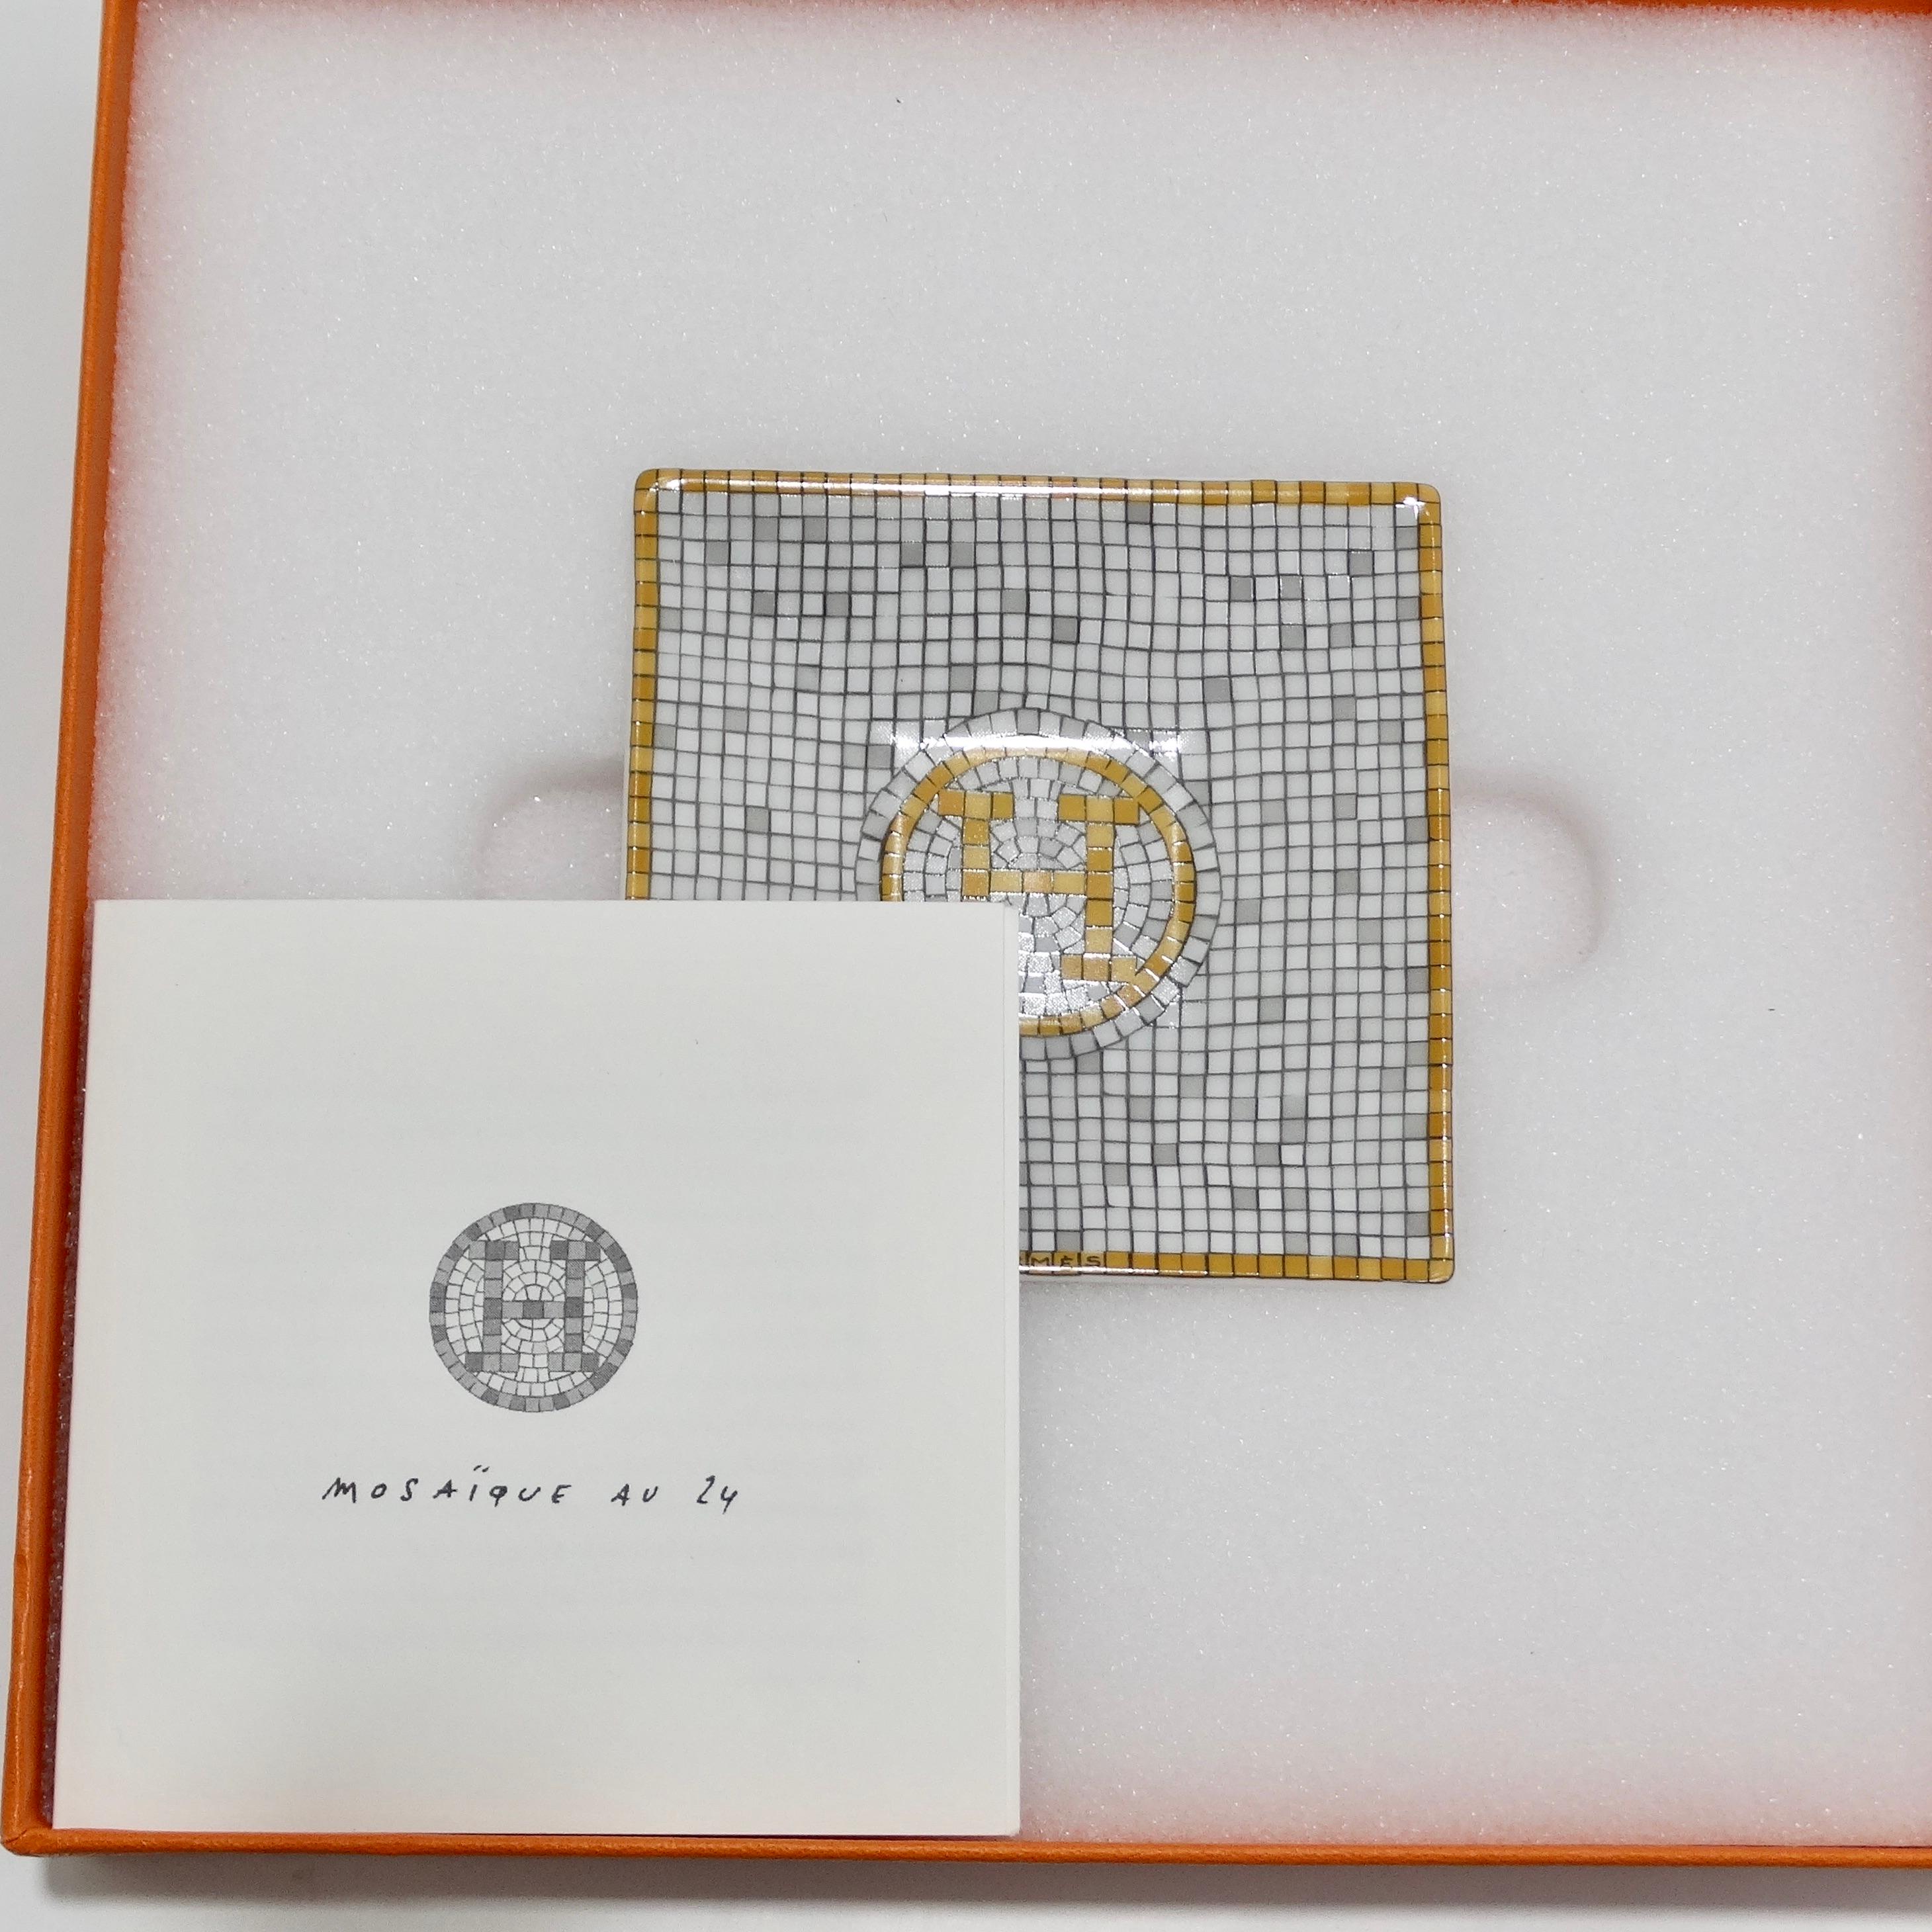 Hermes Mini Mosaique Square Plate In New Condition For Sale In Scottsdale, AZ